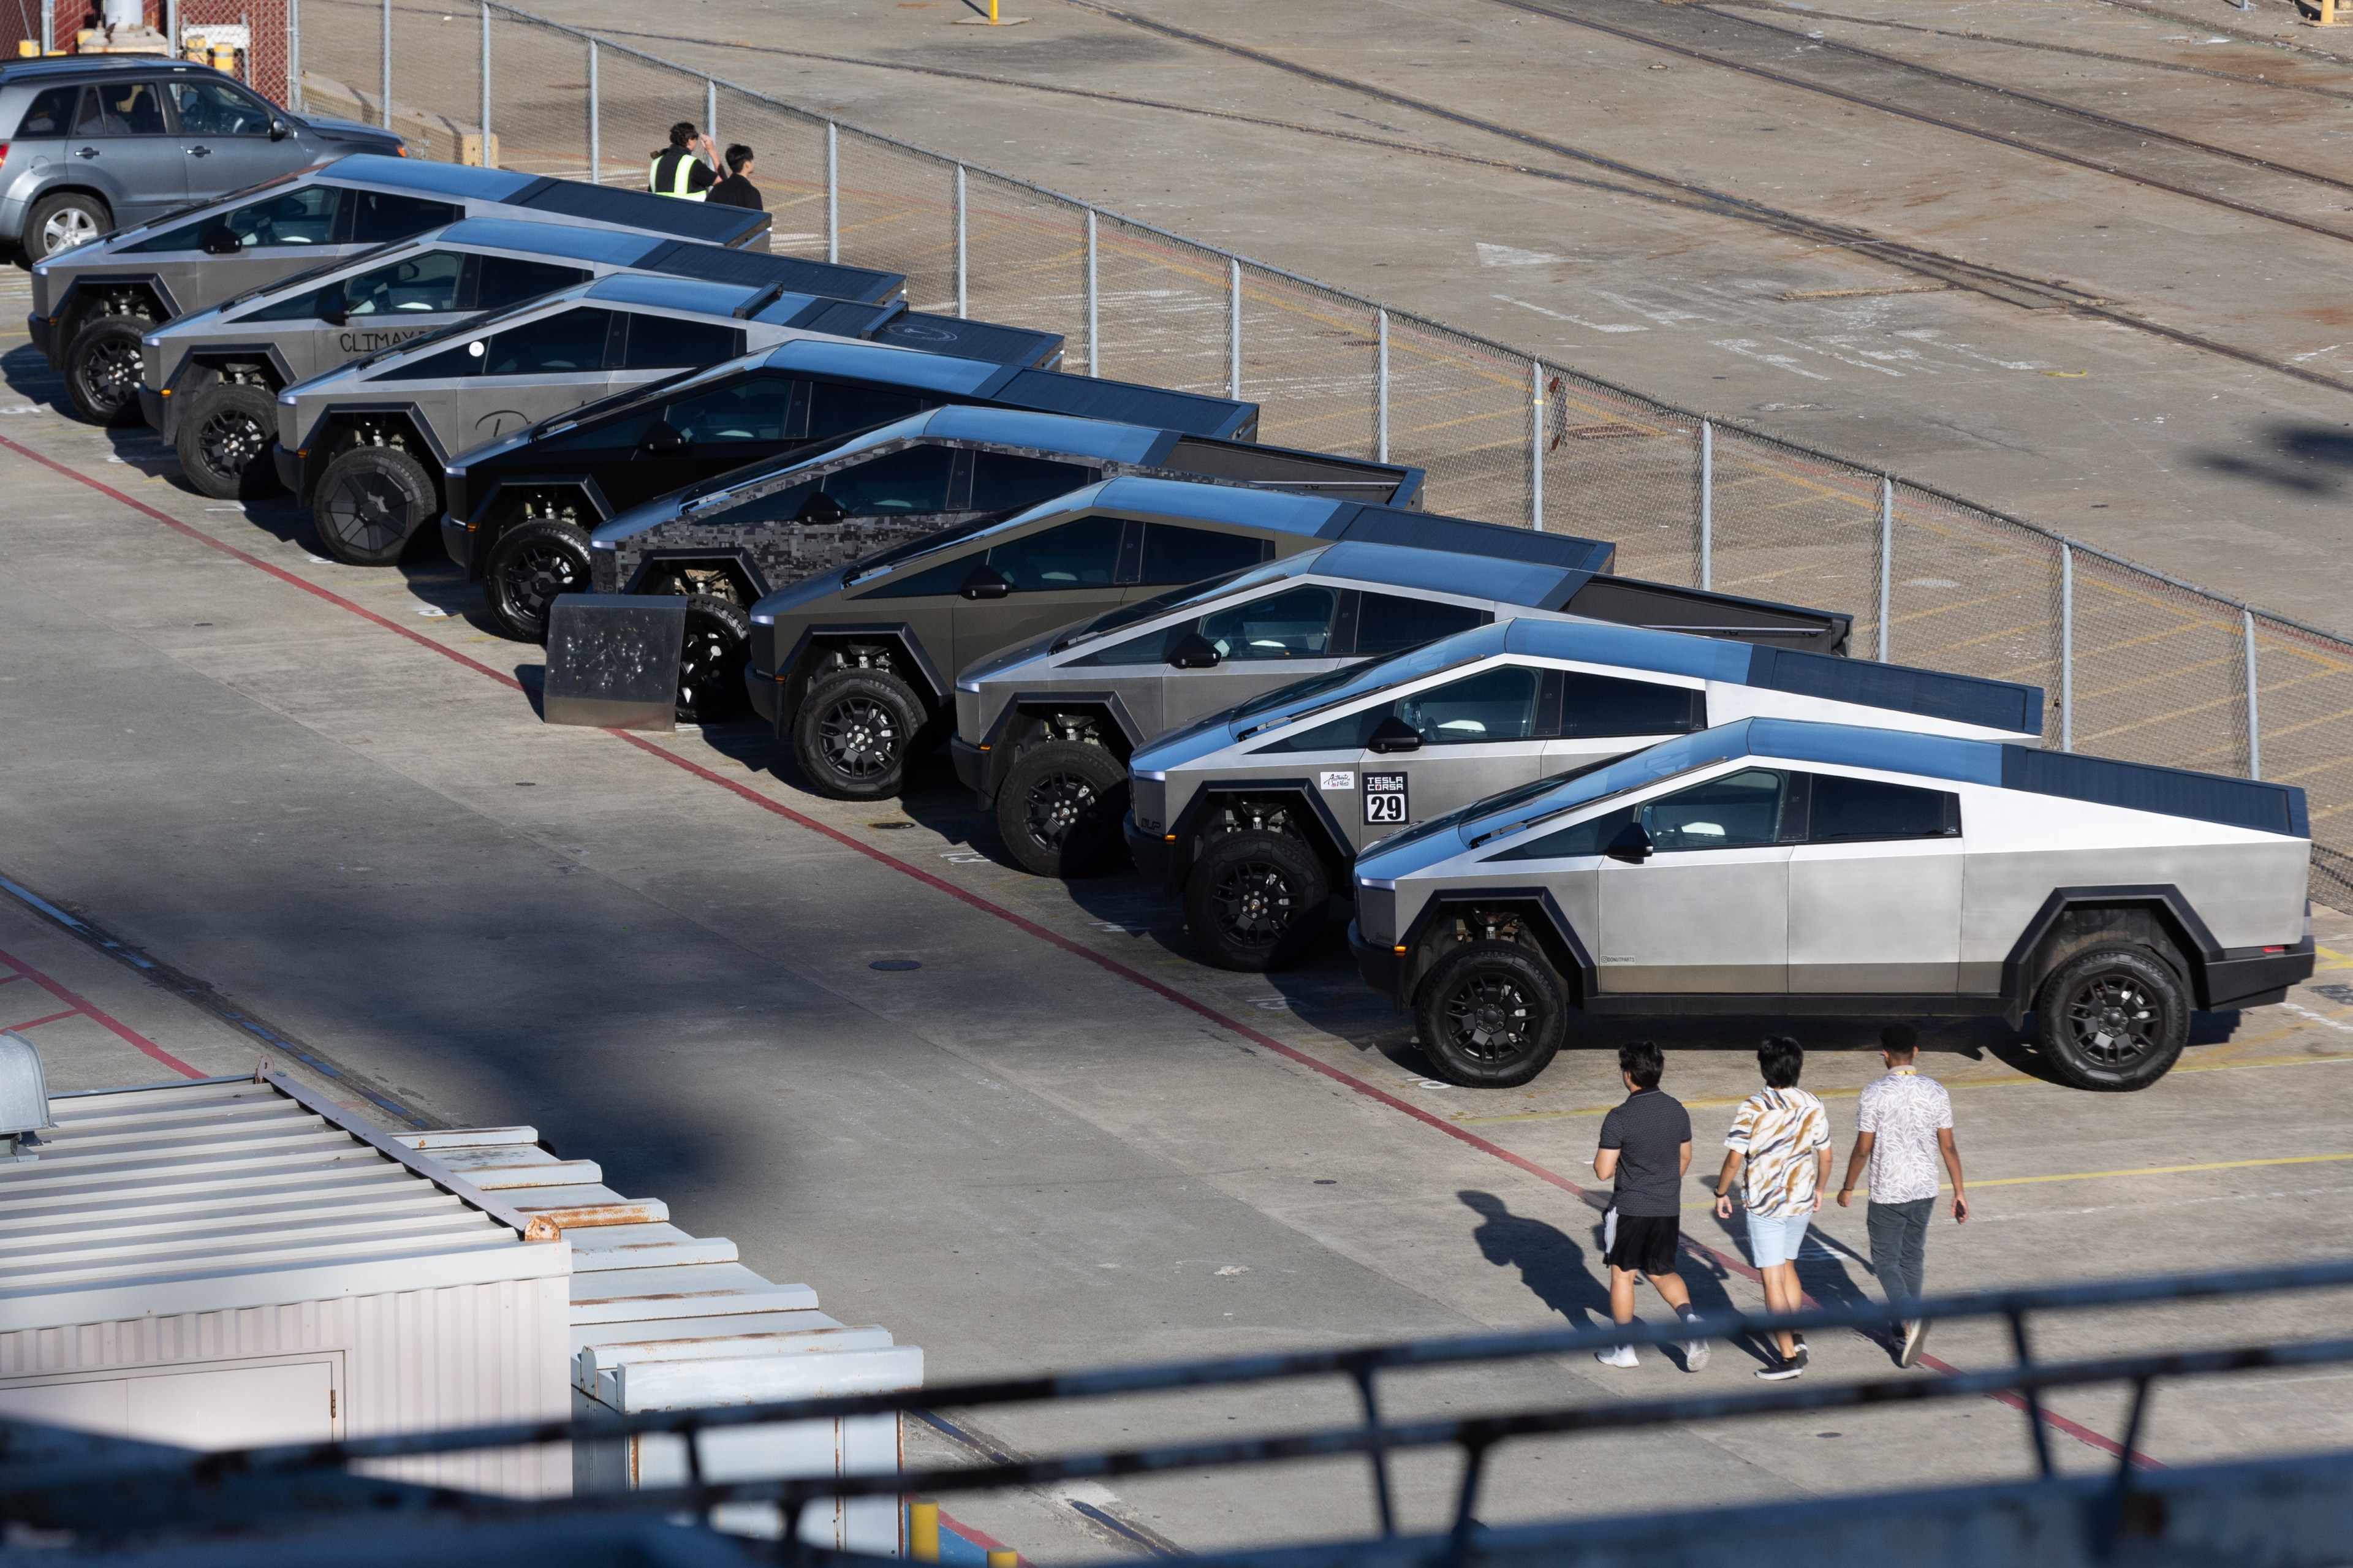 The image shows a row of futuristic, angular truck-like vehicles parked in a lot. Three individuals are walking nearby. The area is fenced and has an industrial feel.